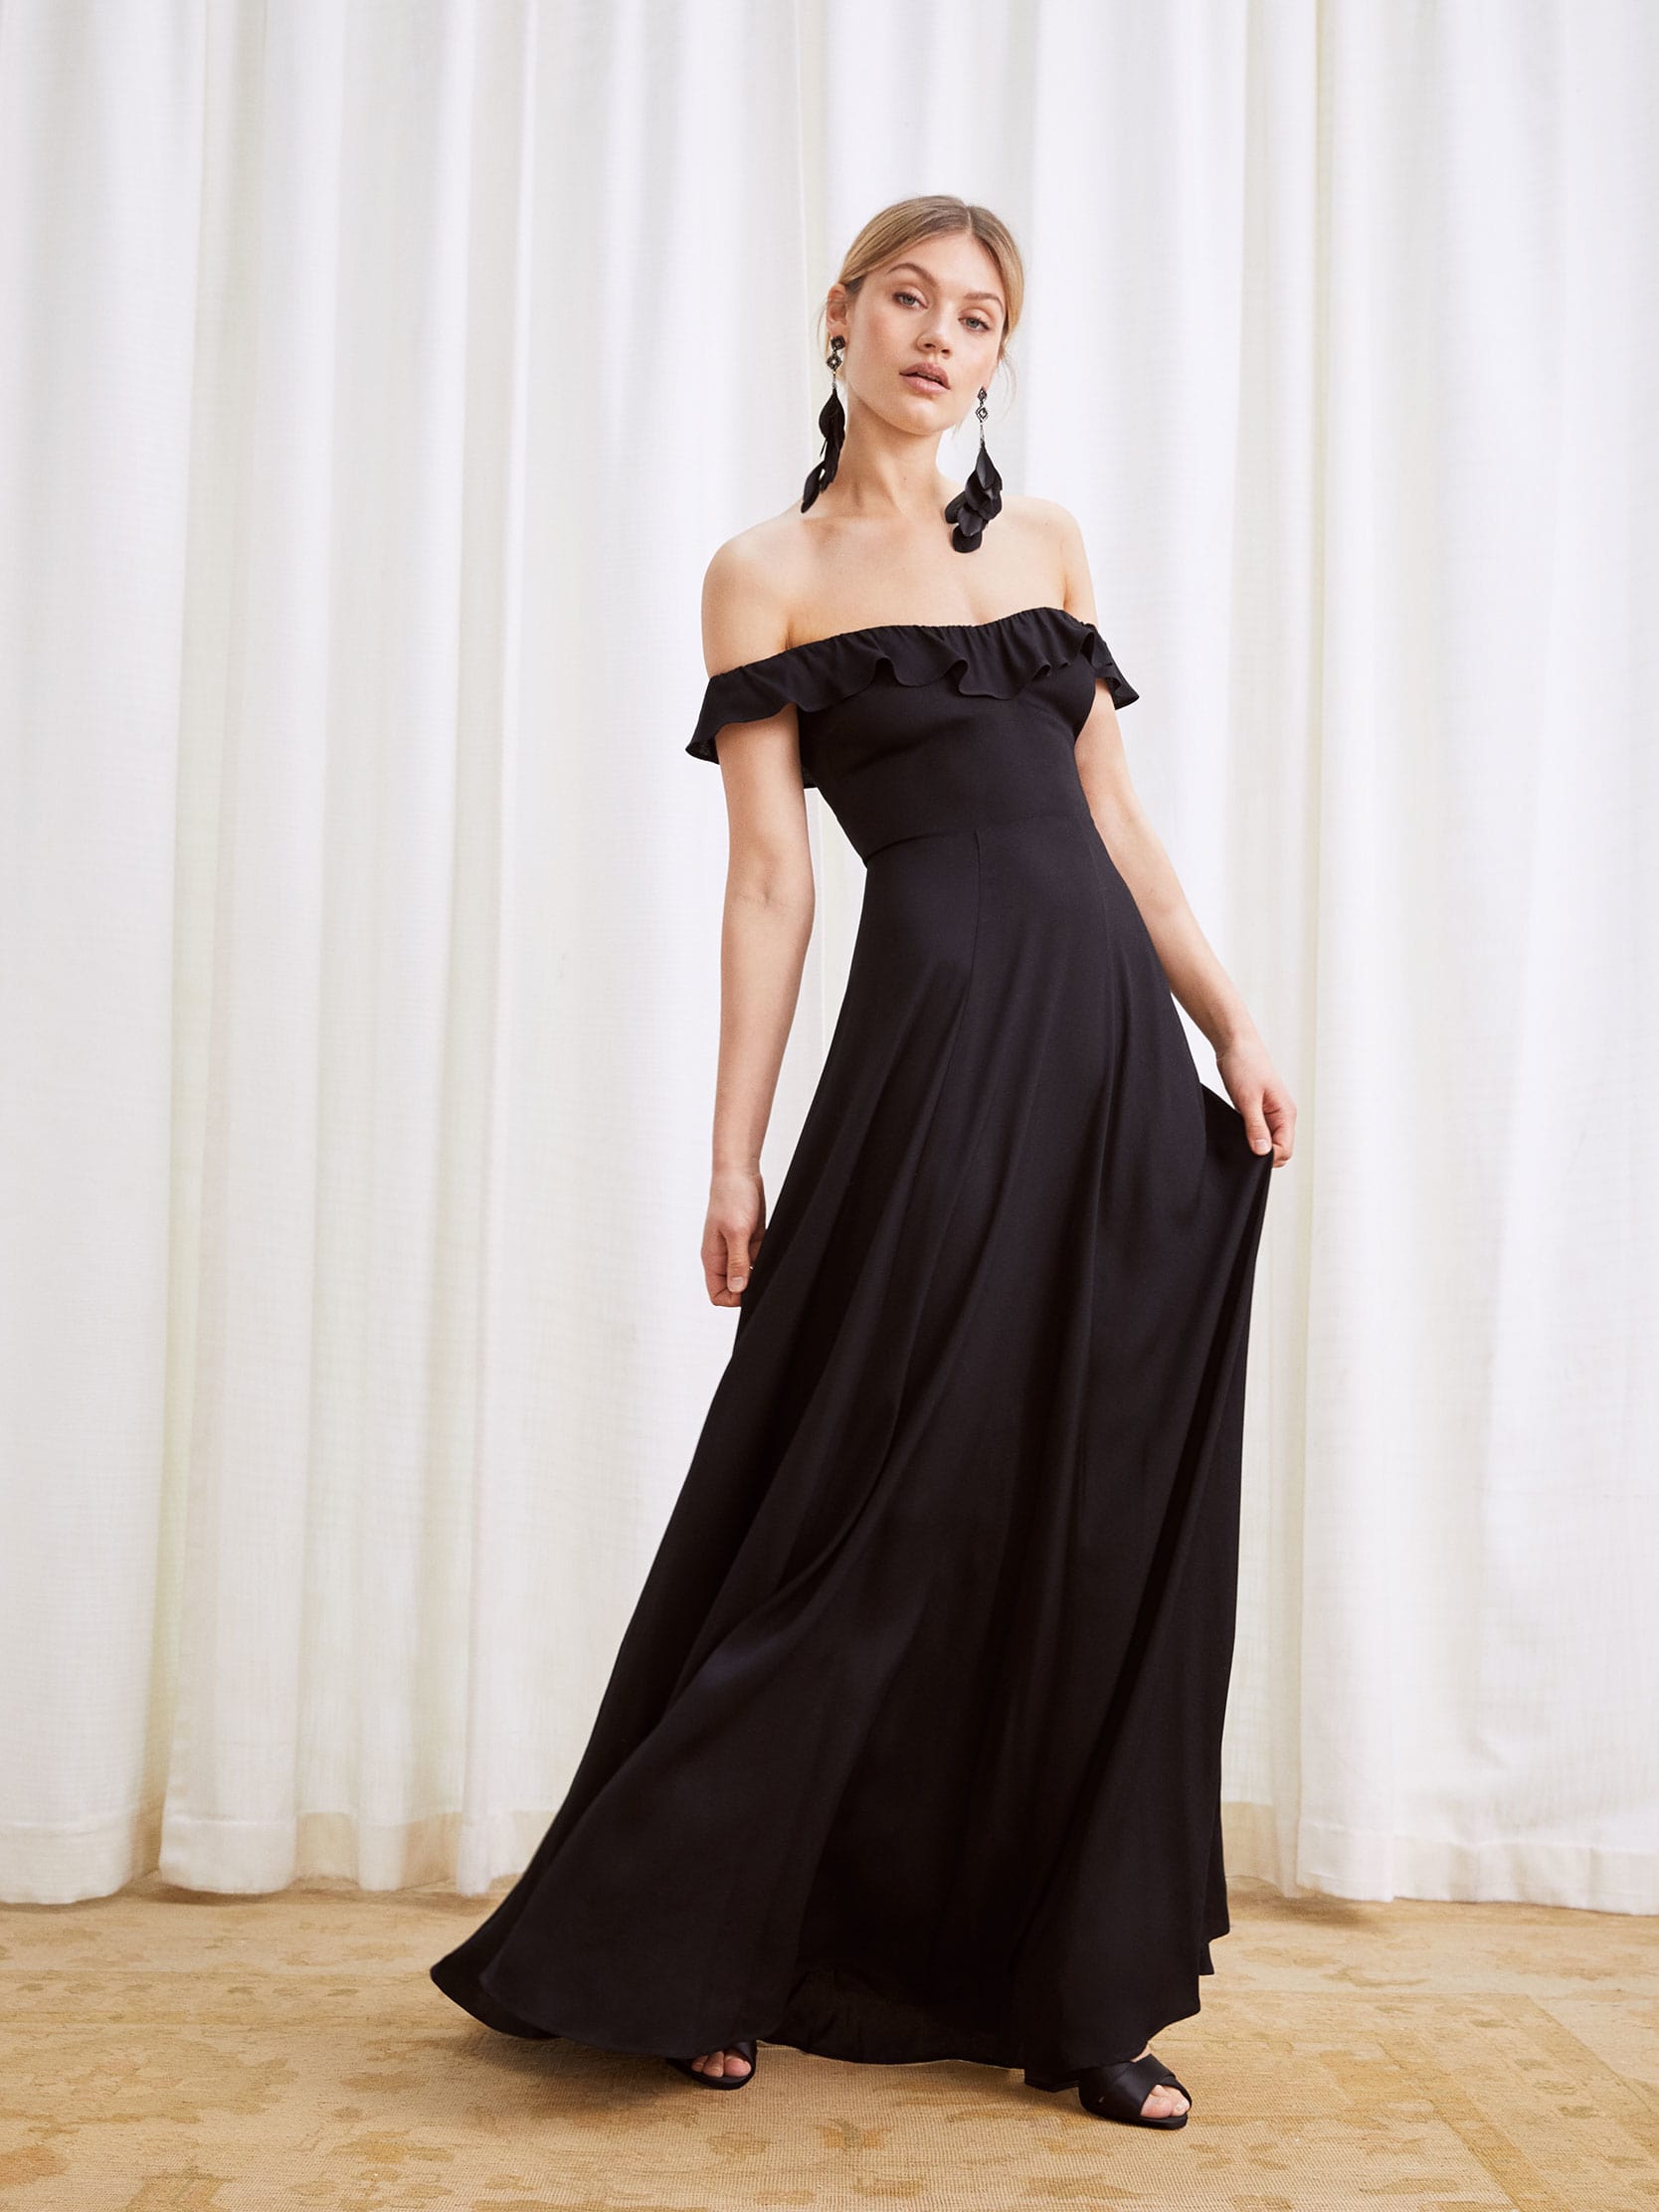 A model wears an off-the-shoulder, floor length dress with a ruffle edged neckline and a center back zipper.